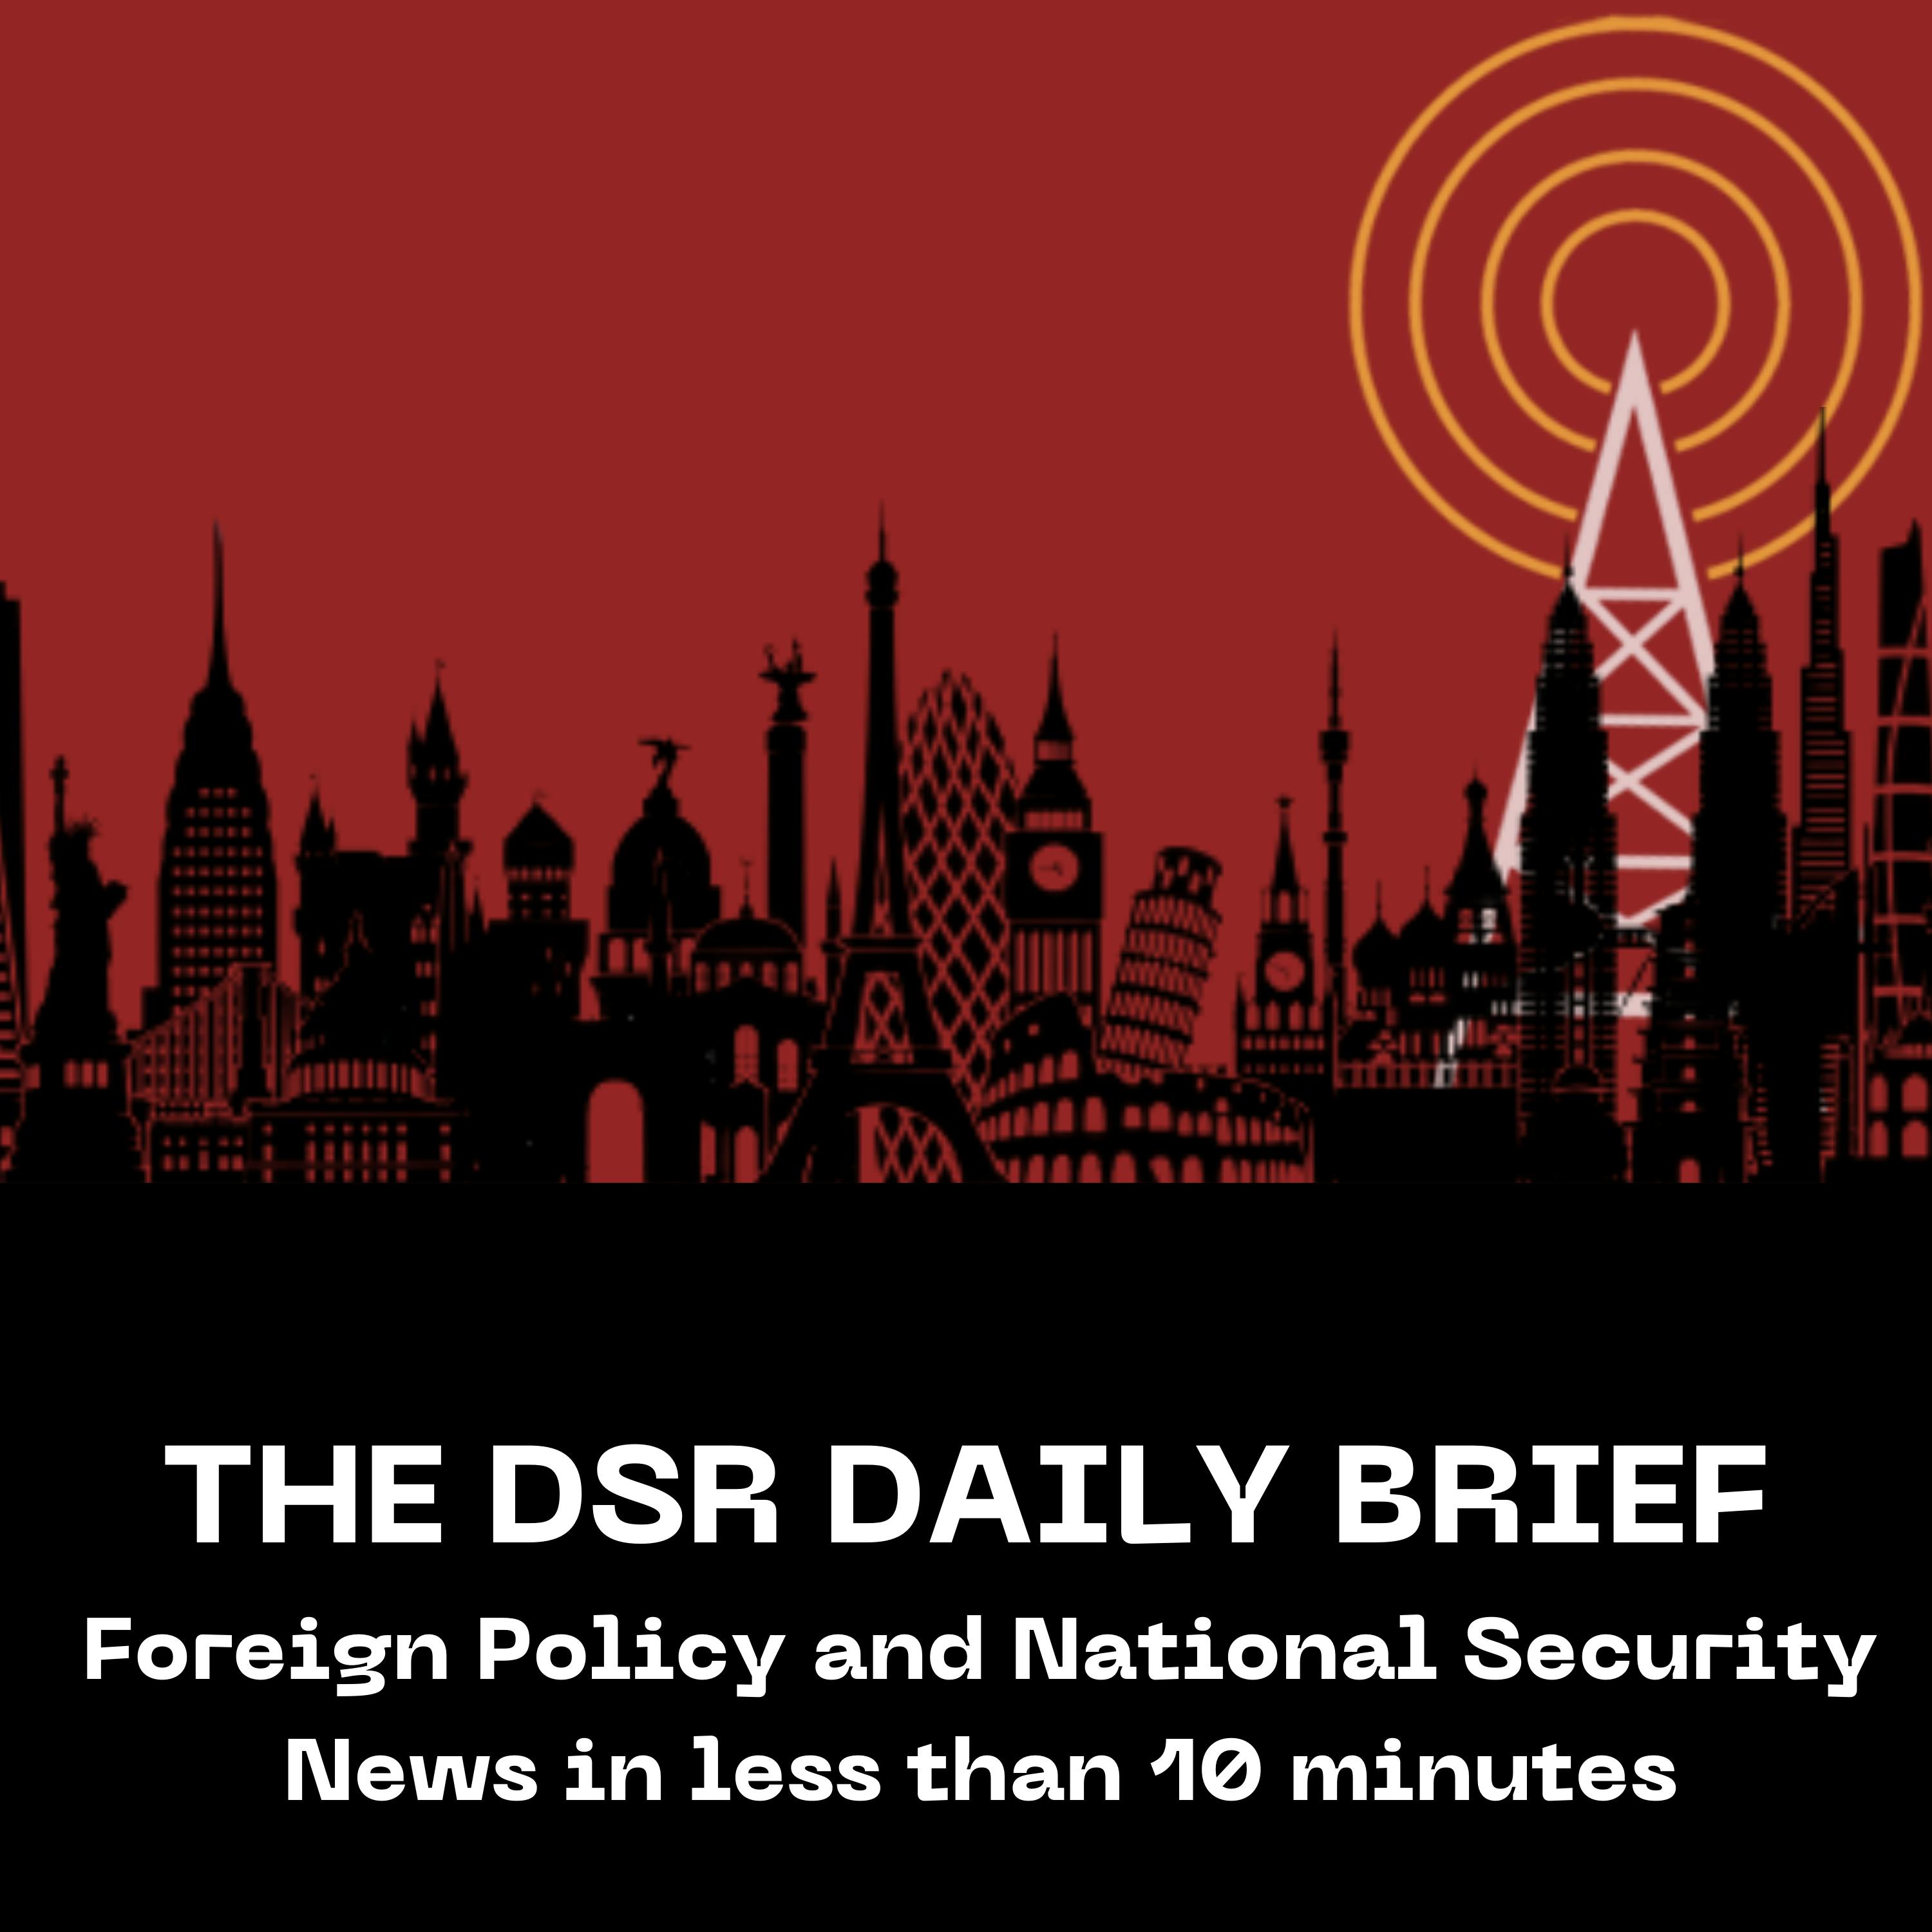 The DSR Daily for November 28: Israel and Hamas Ceasefire Extends into Fifth Day, France Sees Wave of Far-Right Violence